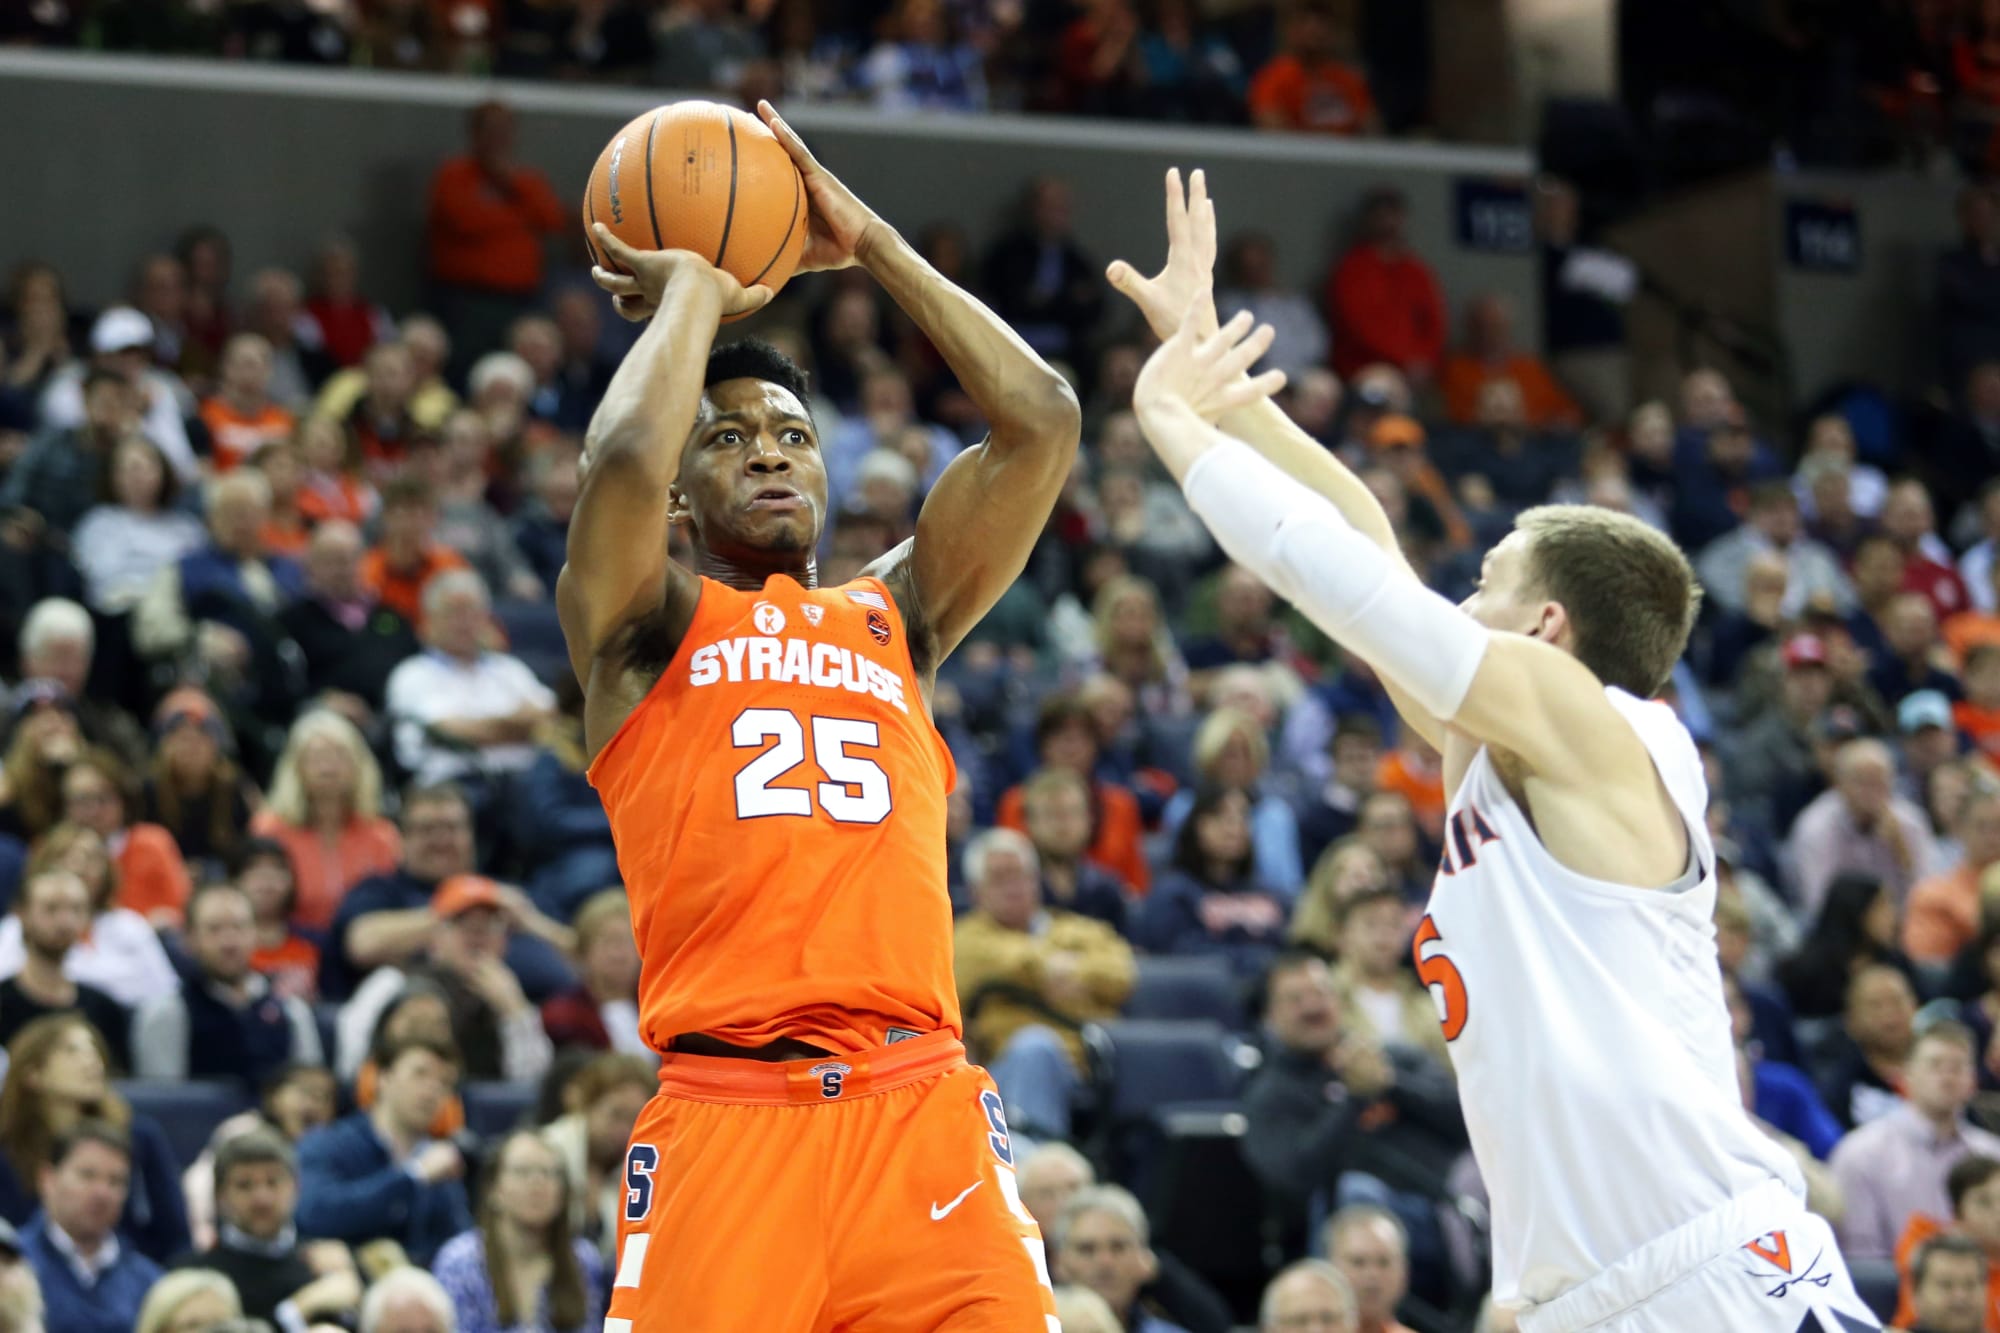 Syracuse vs. Louisville: College basketball game preview, TV schedule